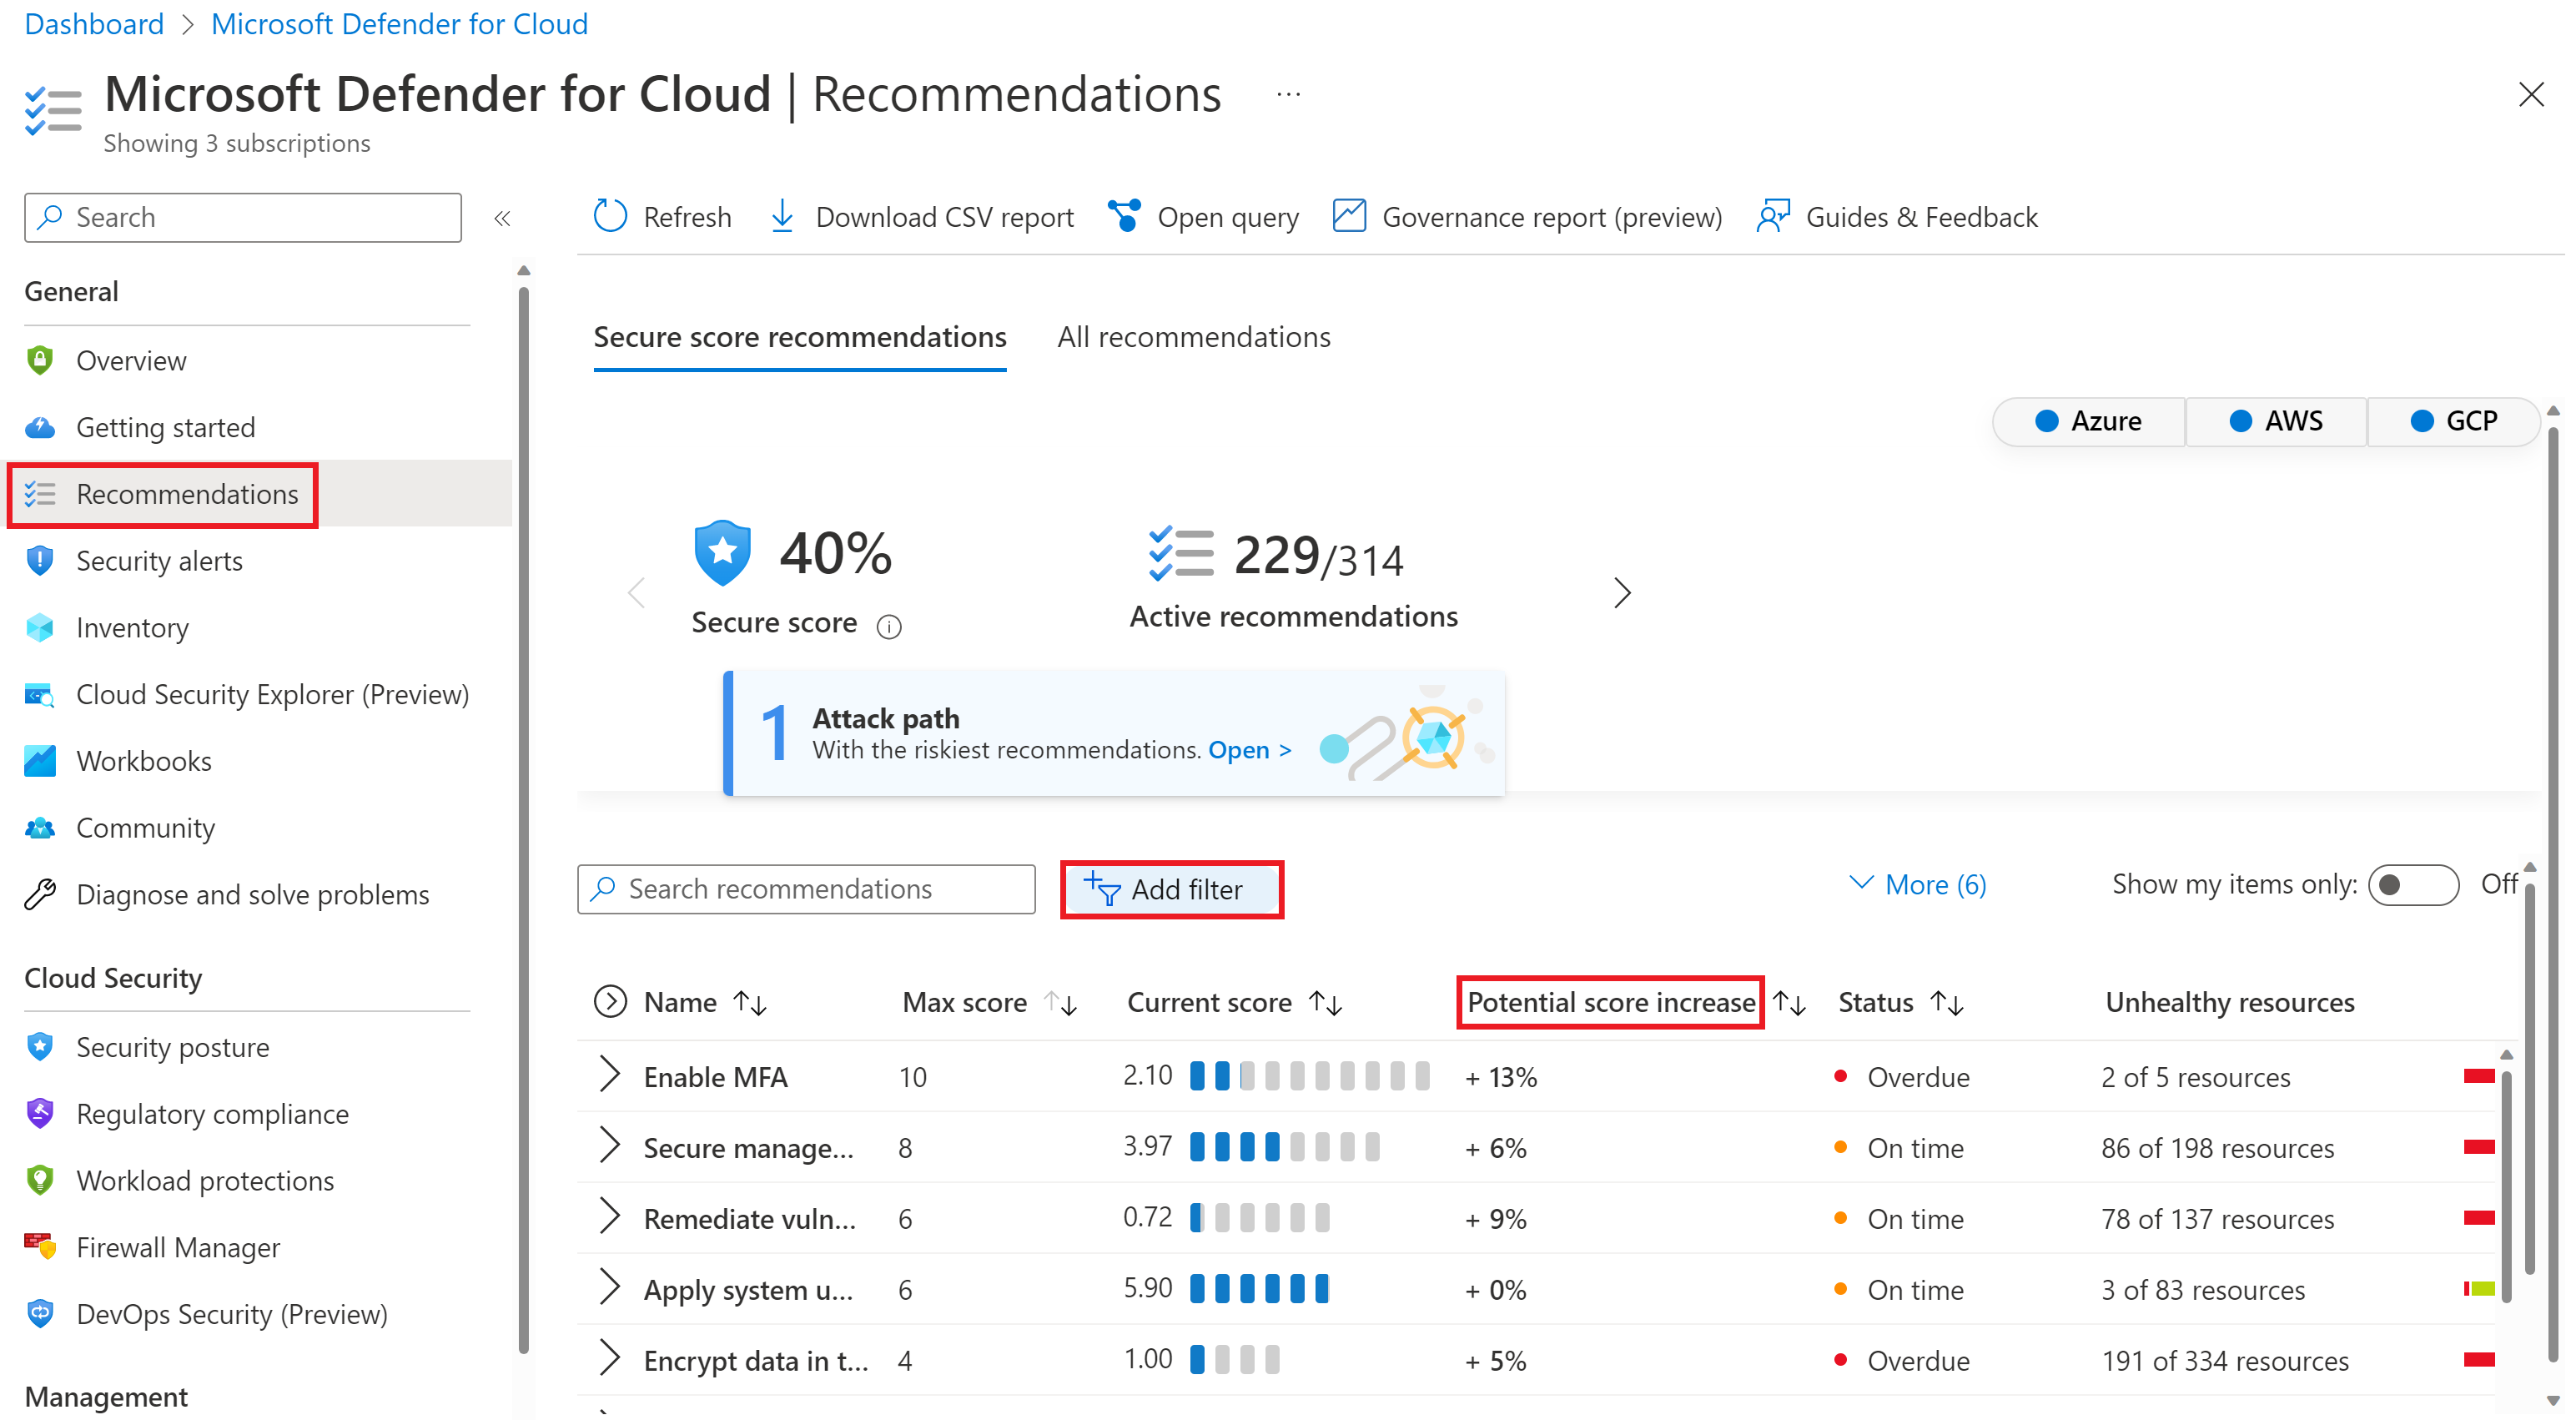 Screenshot of example Microsoft Defender for Cloud recommendations.